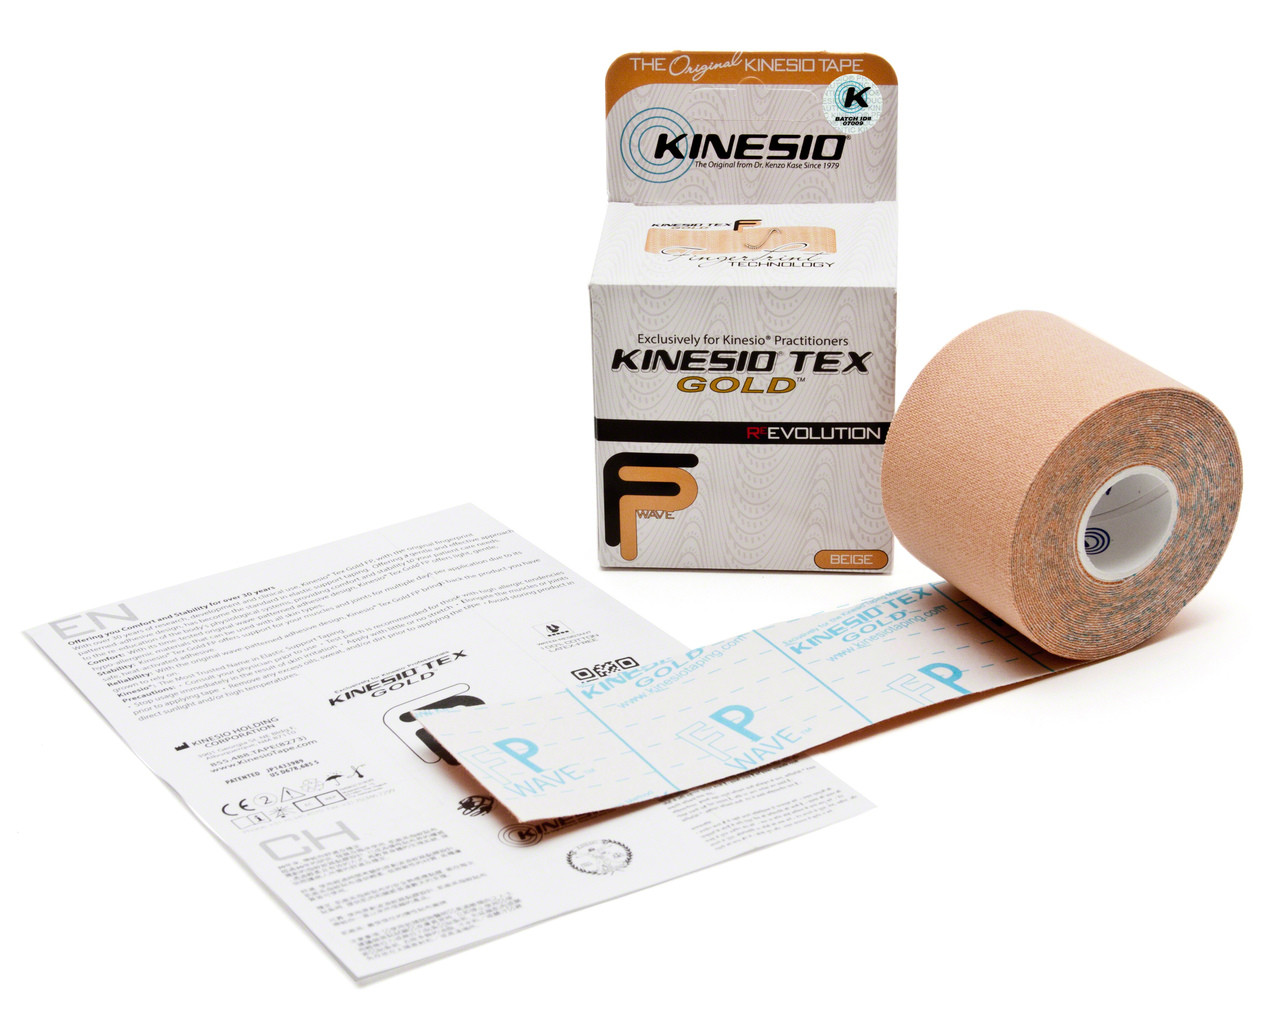 OK TAPE PRO Kinesiology Tape, 2inch x Long Roll 16ft Free Cut Tape, Elastic  Athletic Tape Therapeutic Latex Free, Beige+Beige